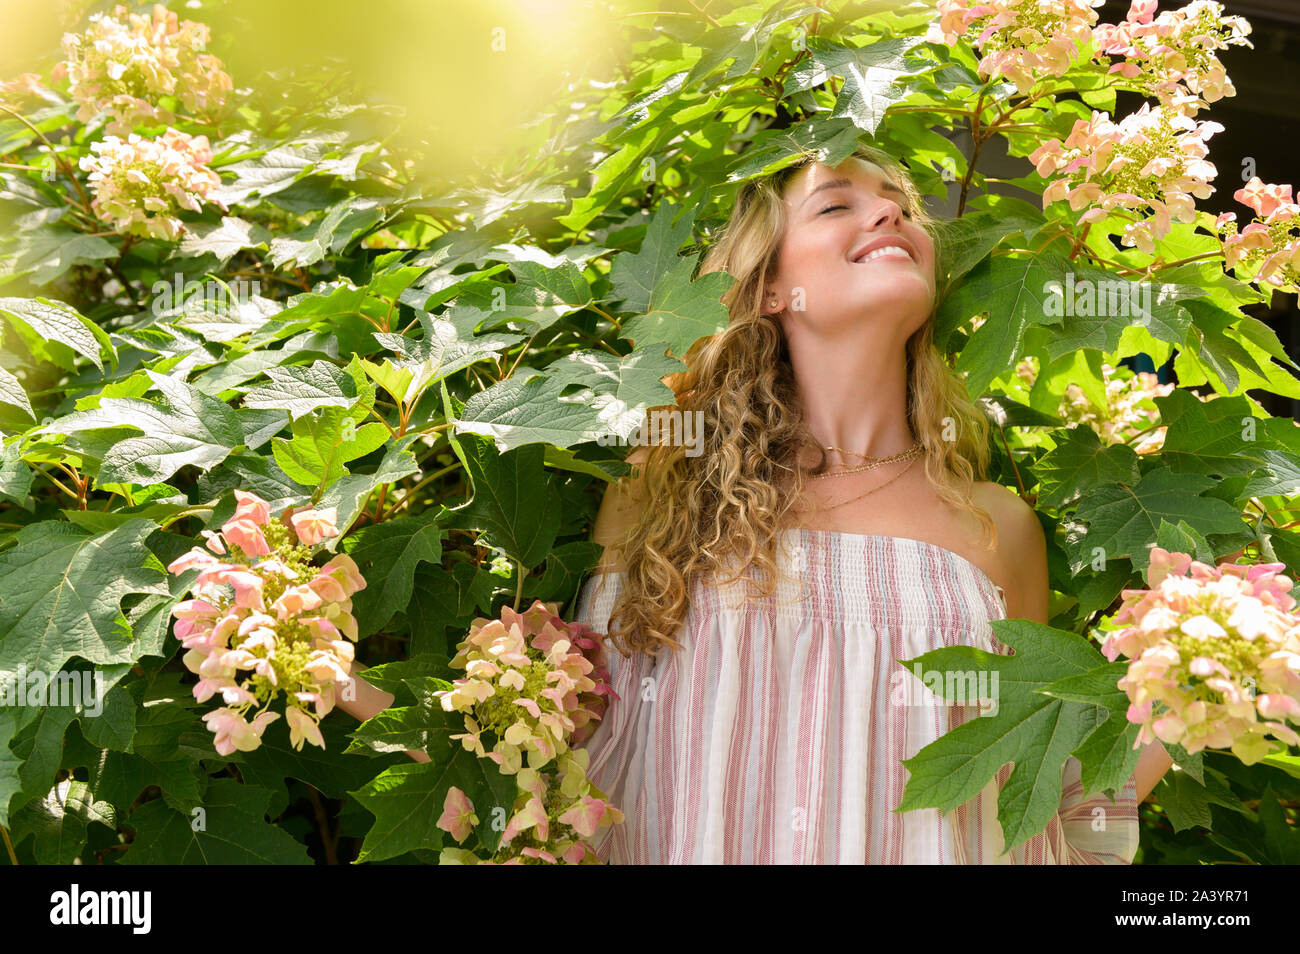 Smiling young woman among flowers Stock Photo